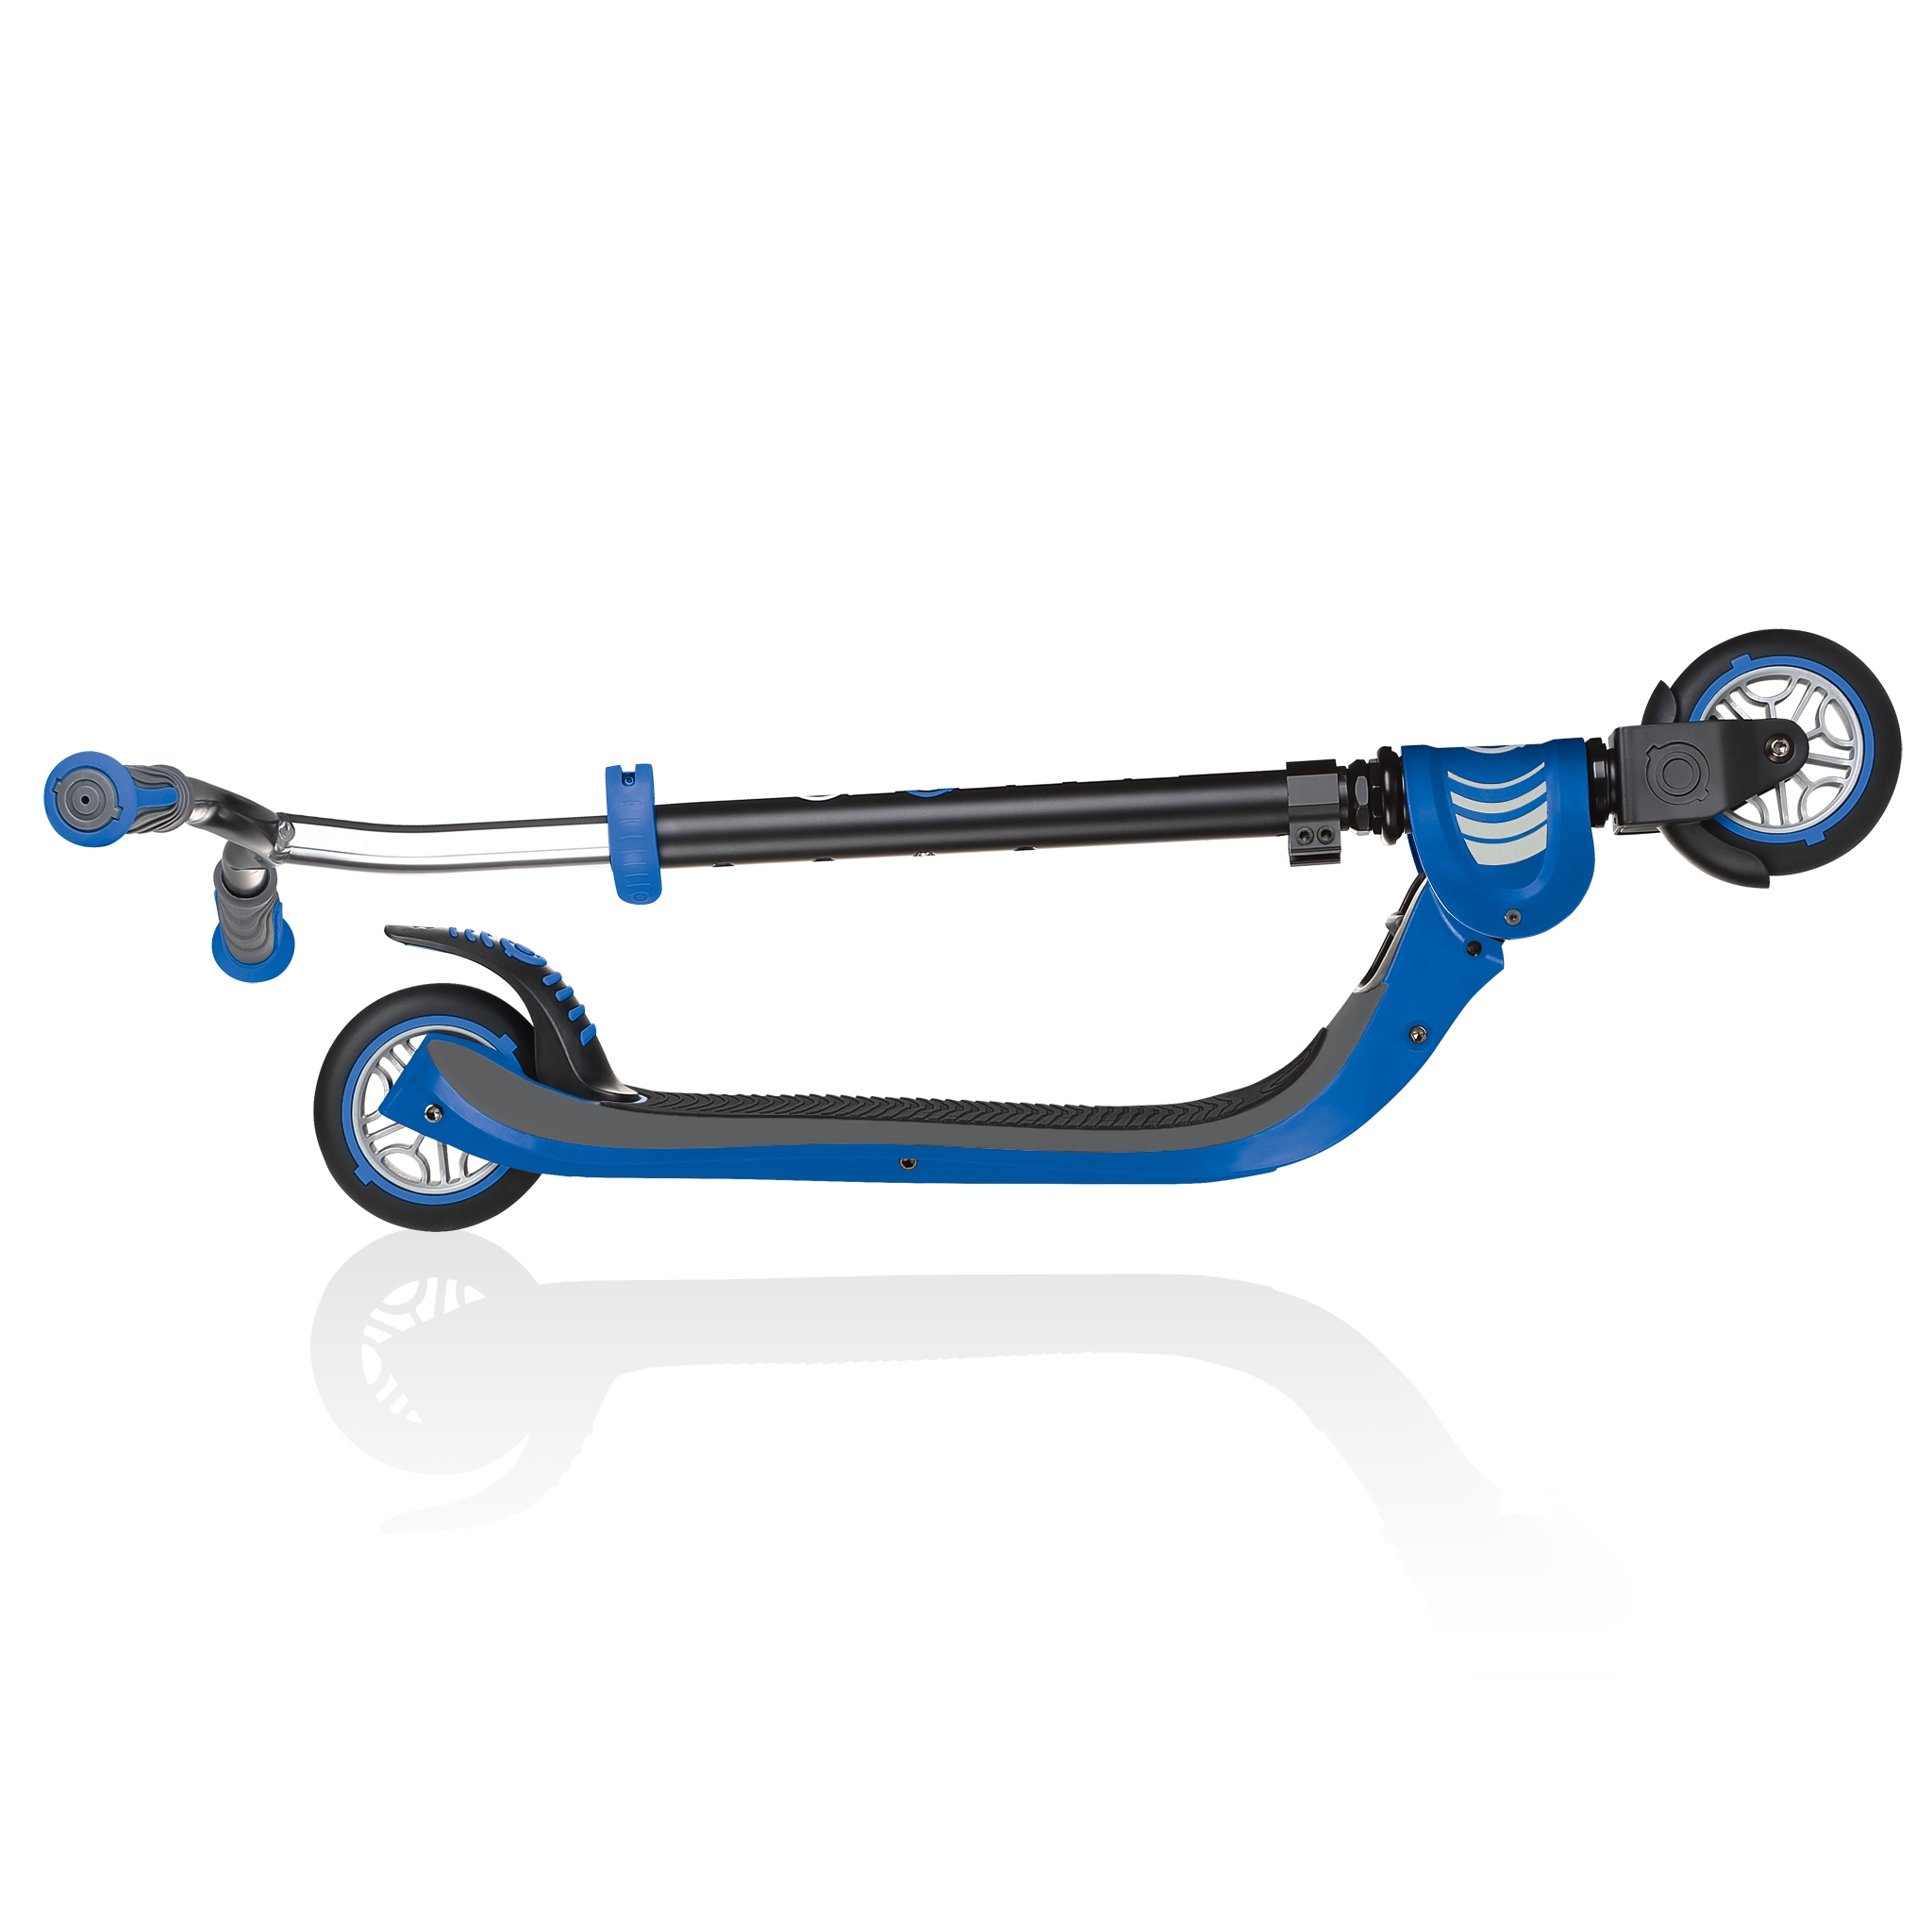 FLOW-FOLDABLE-125-2-wheel-foldable-scooter-for-kids-navy-blue 1